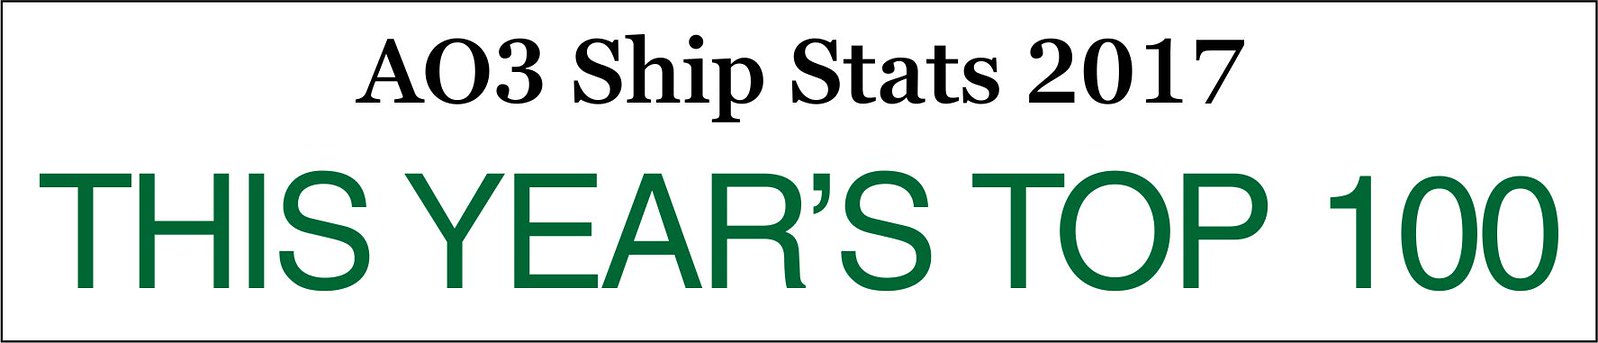 Banner reading: "AO3 Ship Stats 2017: This Year's Top 100. 